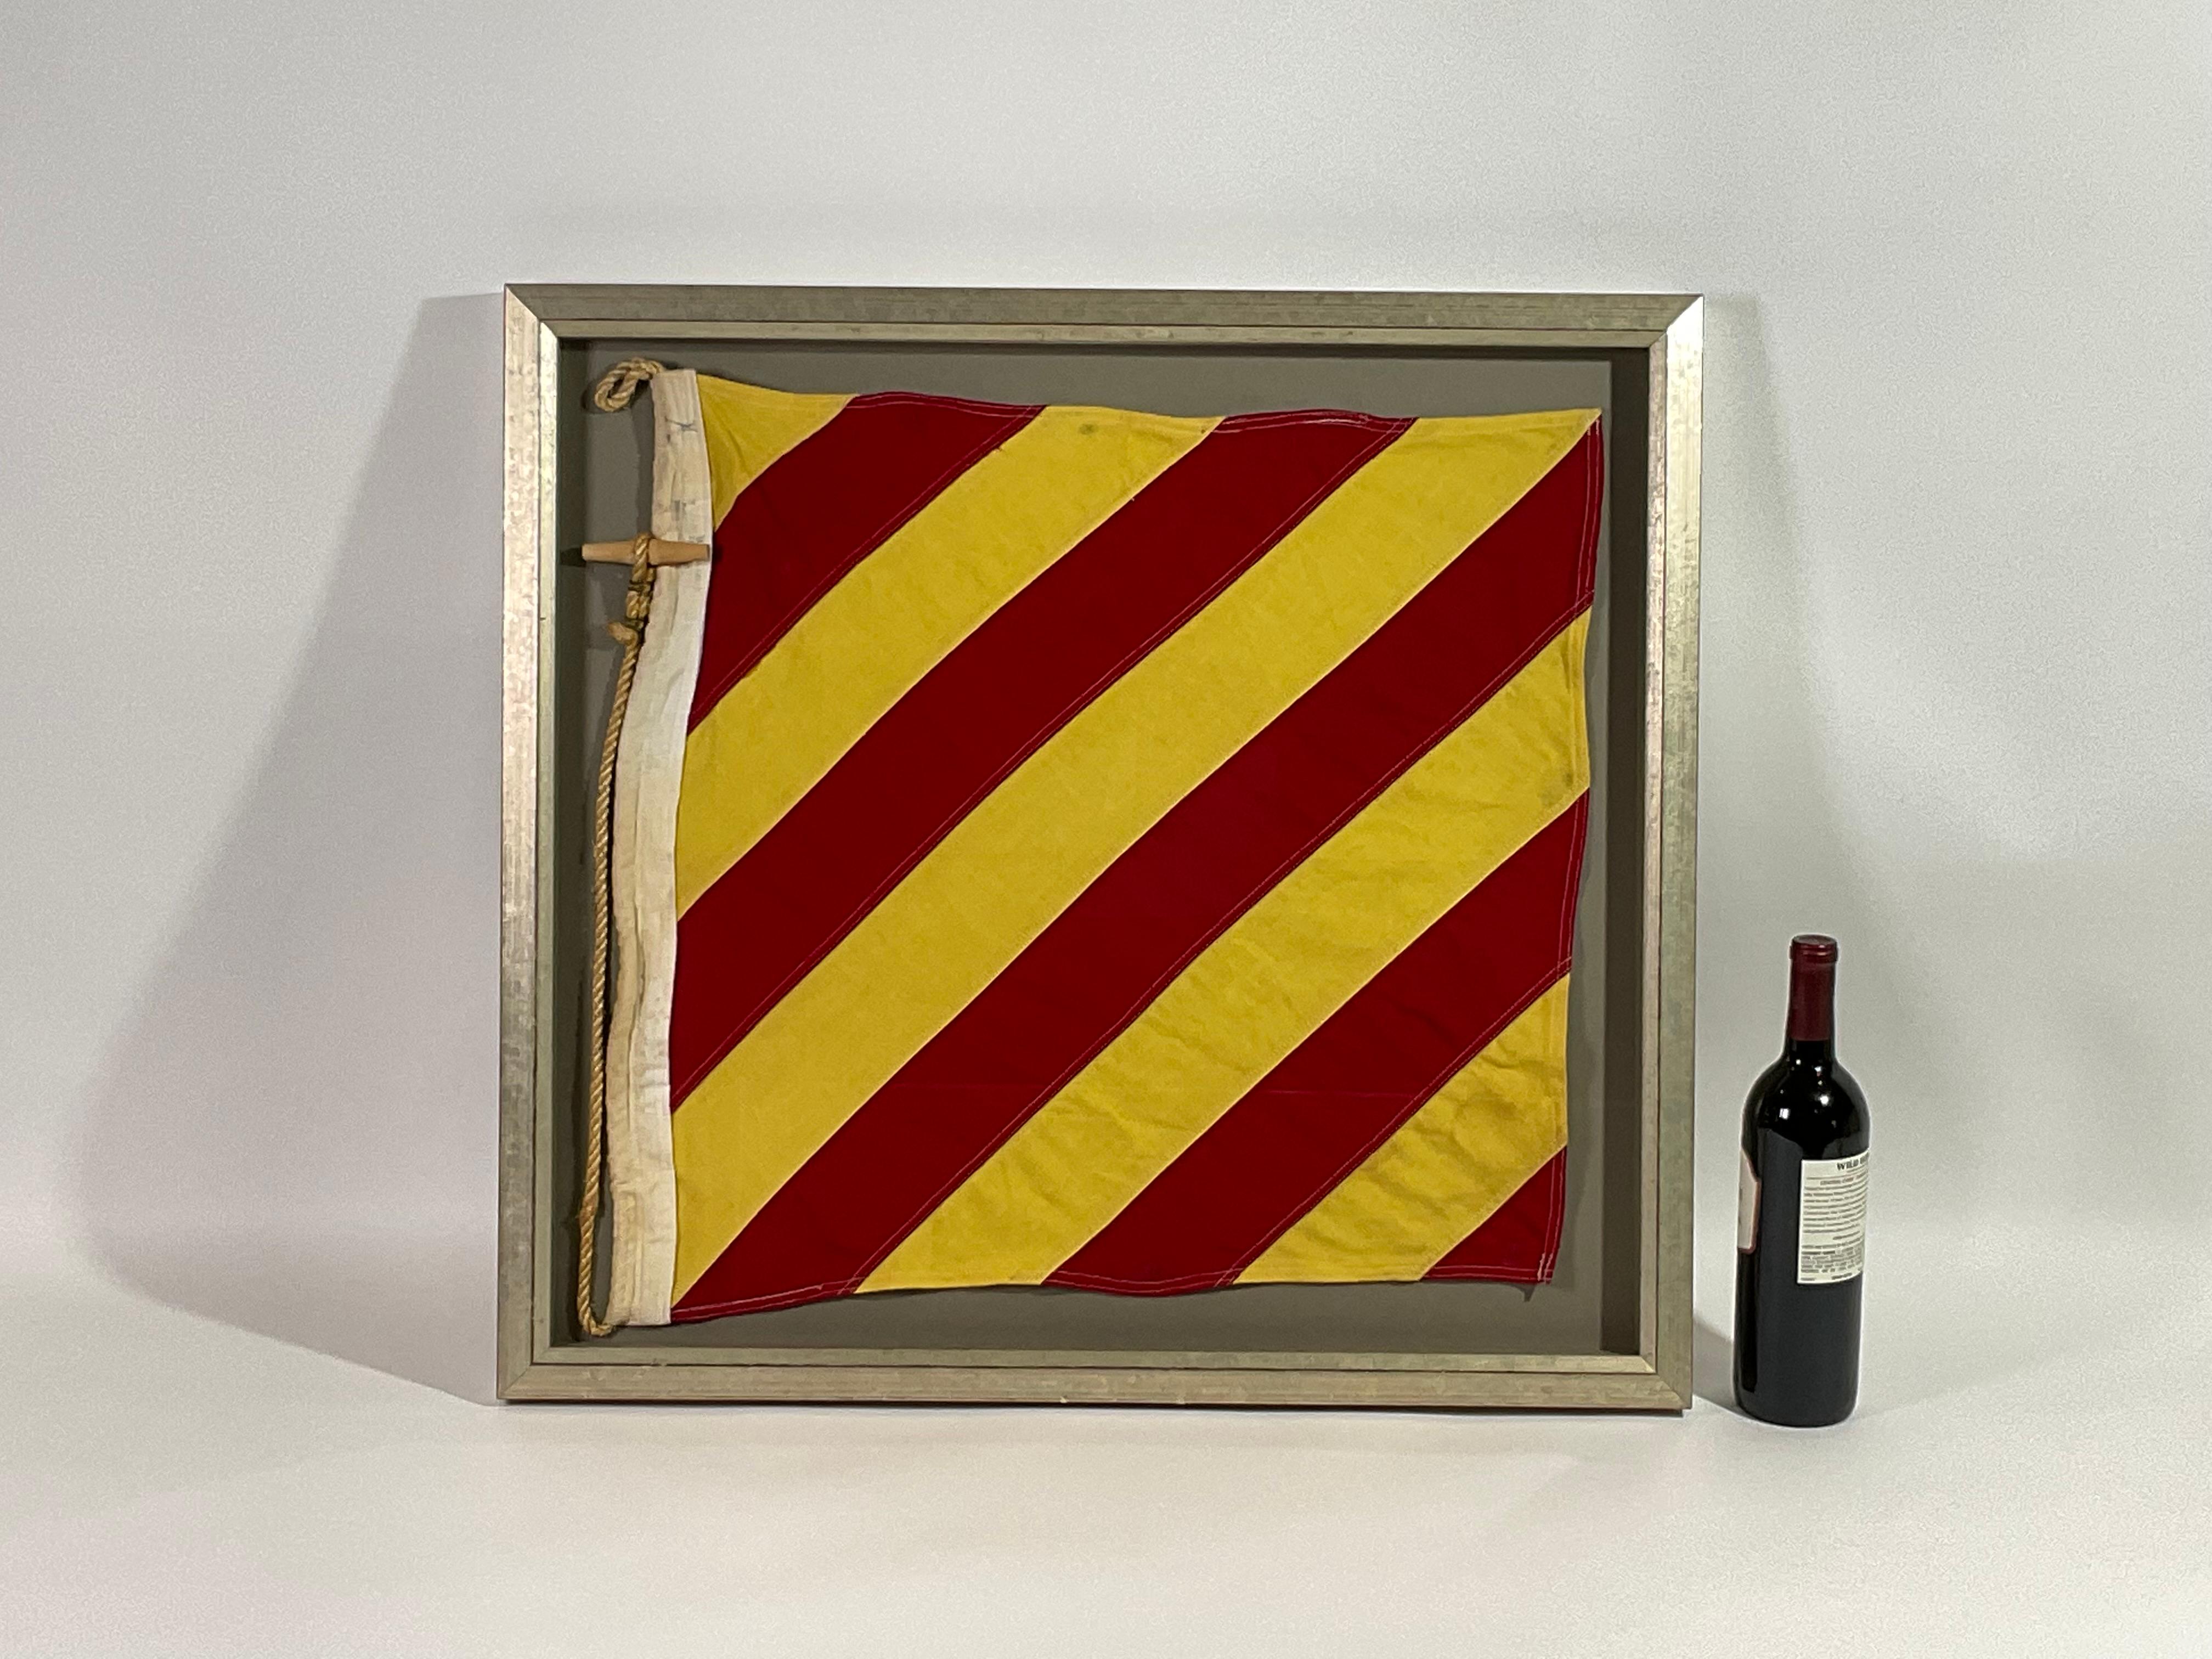 Framed maritime signal flag representing the letter “Y” in the international code of signals. This authentic and ocean used pennant is made of individual panels of red and yellow. Fitted to a heavy canvas hoist band with original rope and wood